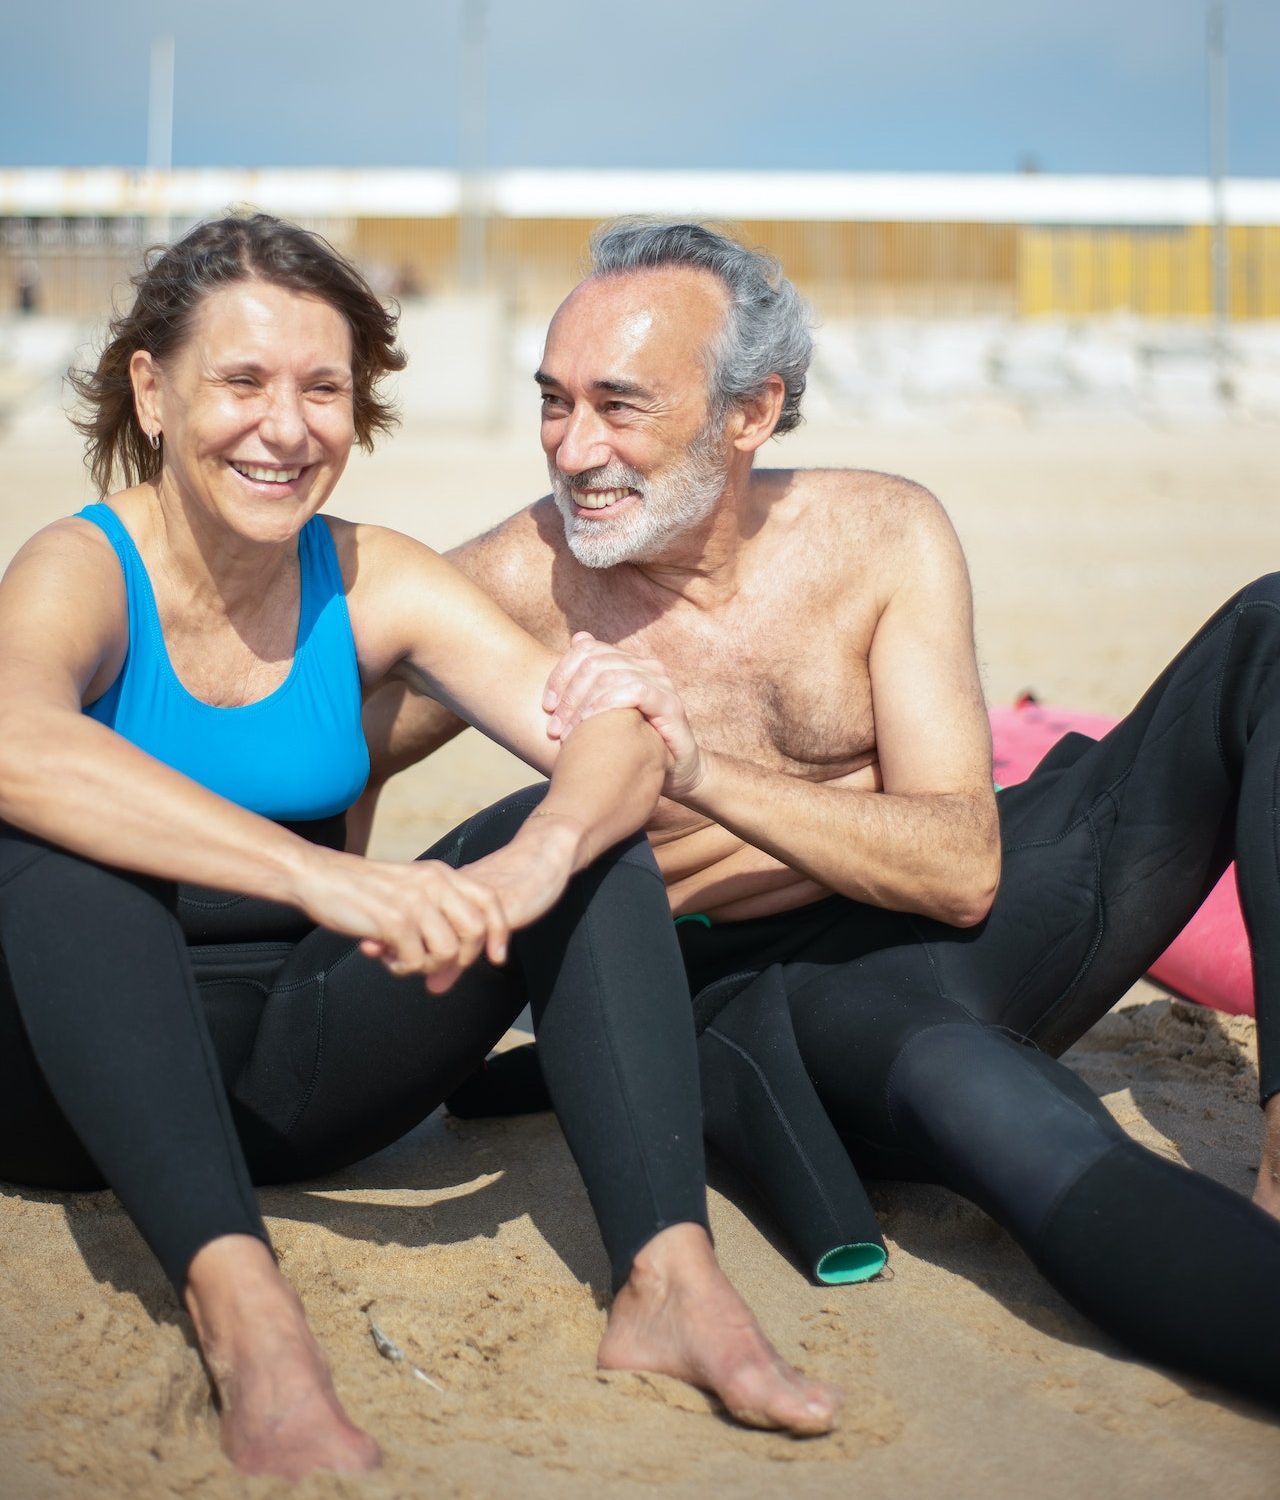 senior man and woman on sunny beach in wetsuits